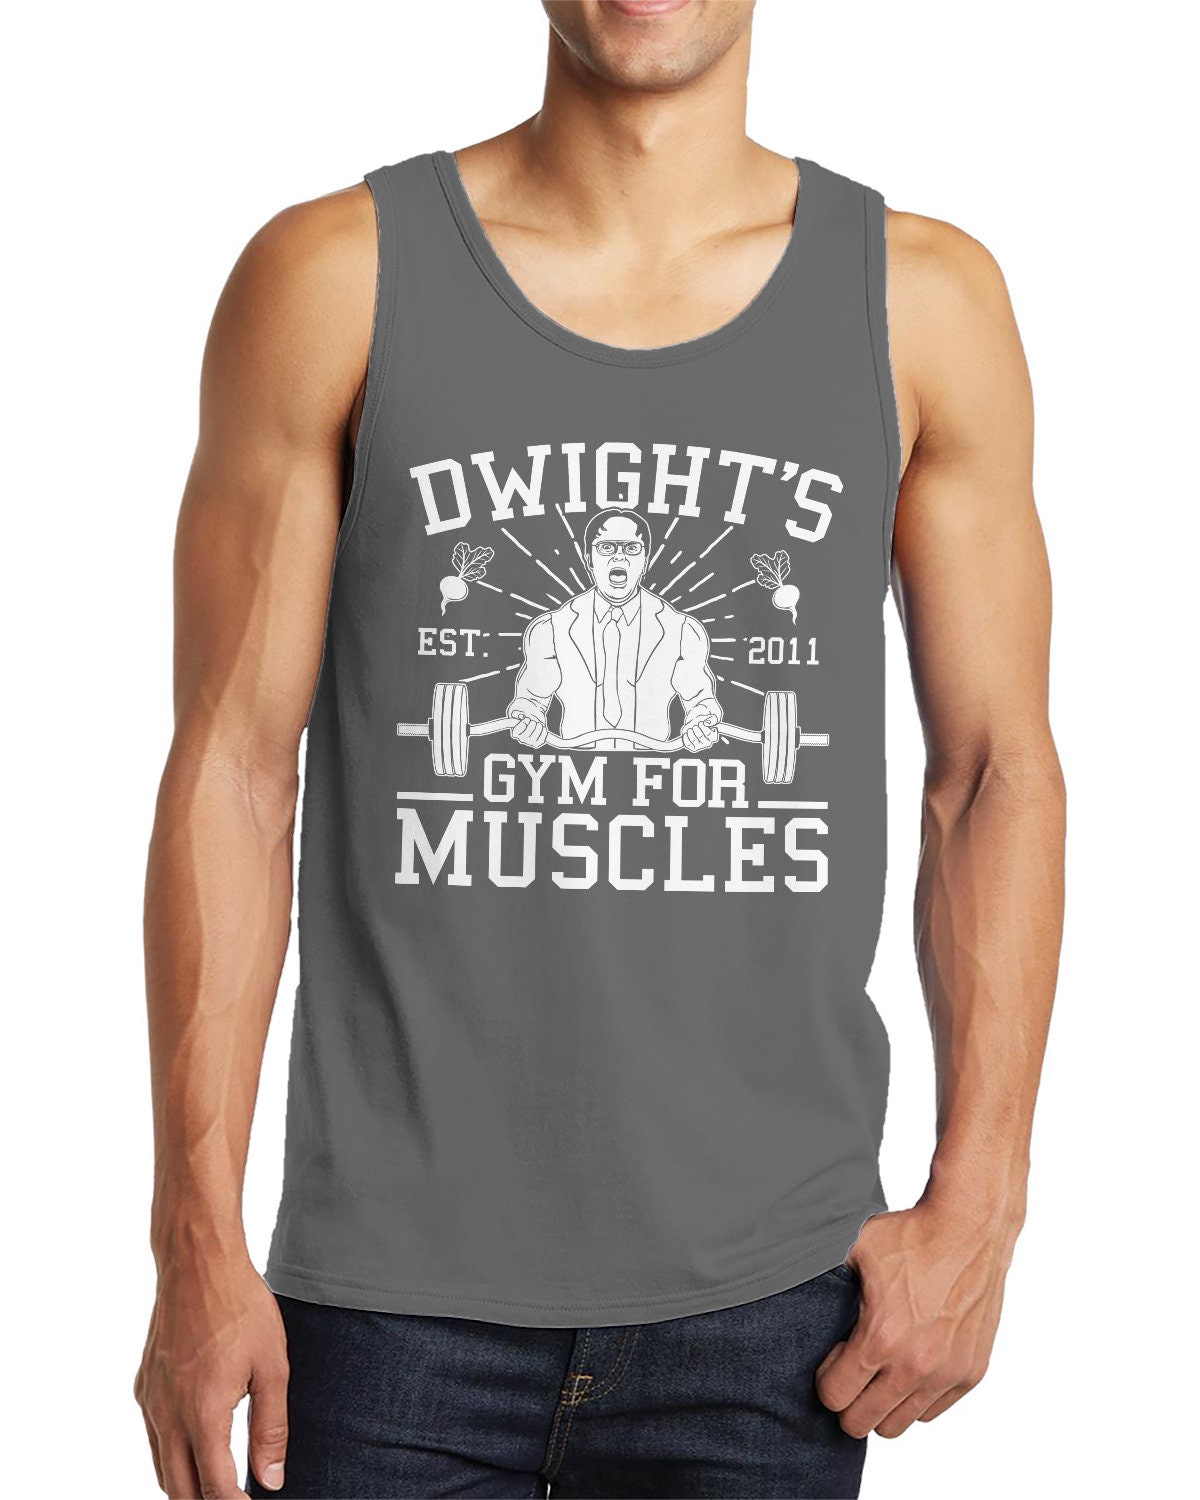 Dwights Gym for Muscles Funny TV Show Work Out Sayings - Etsy